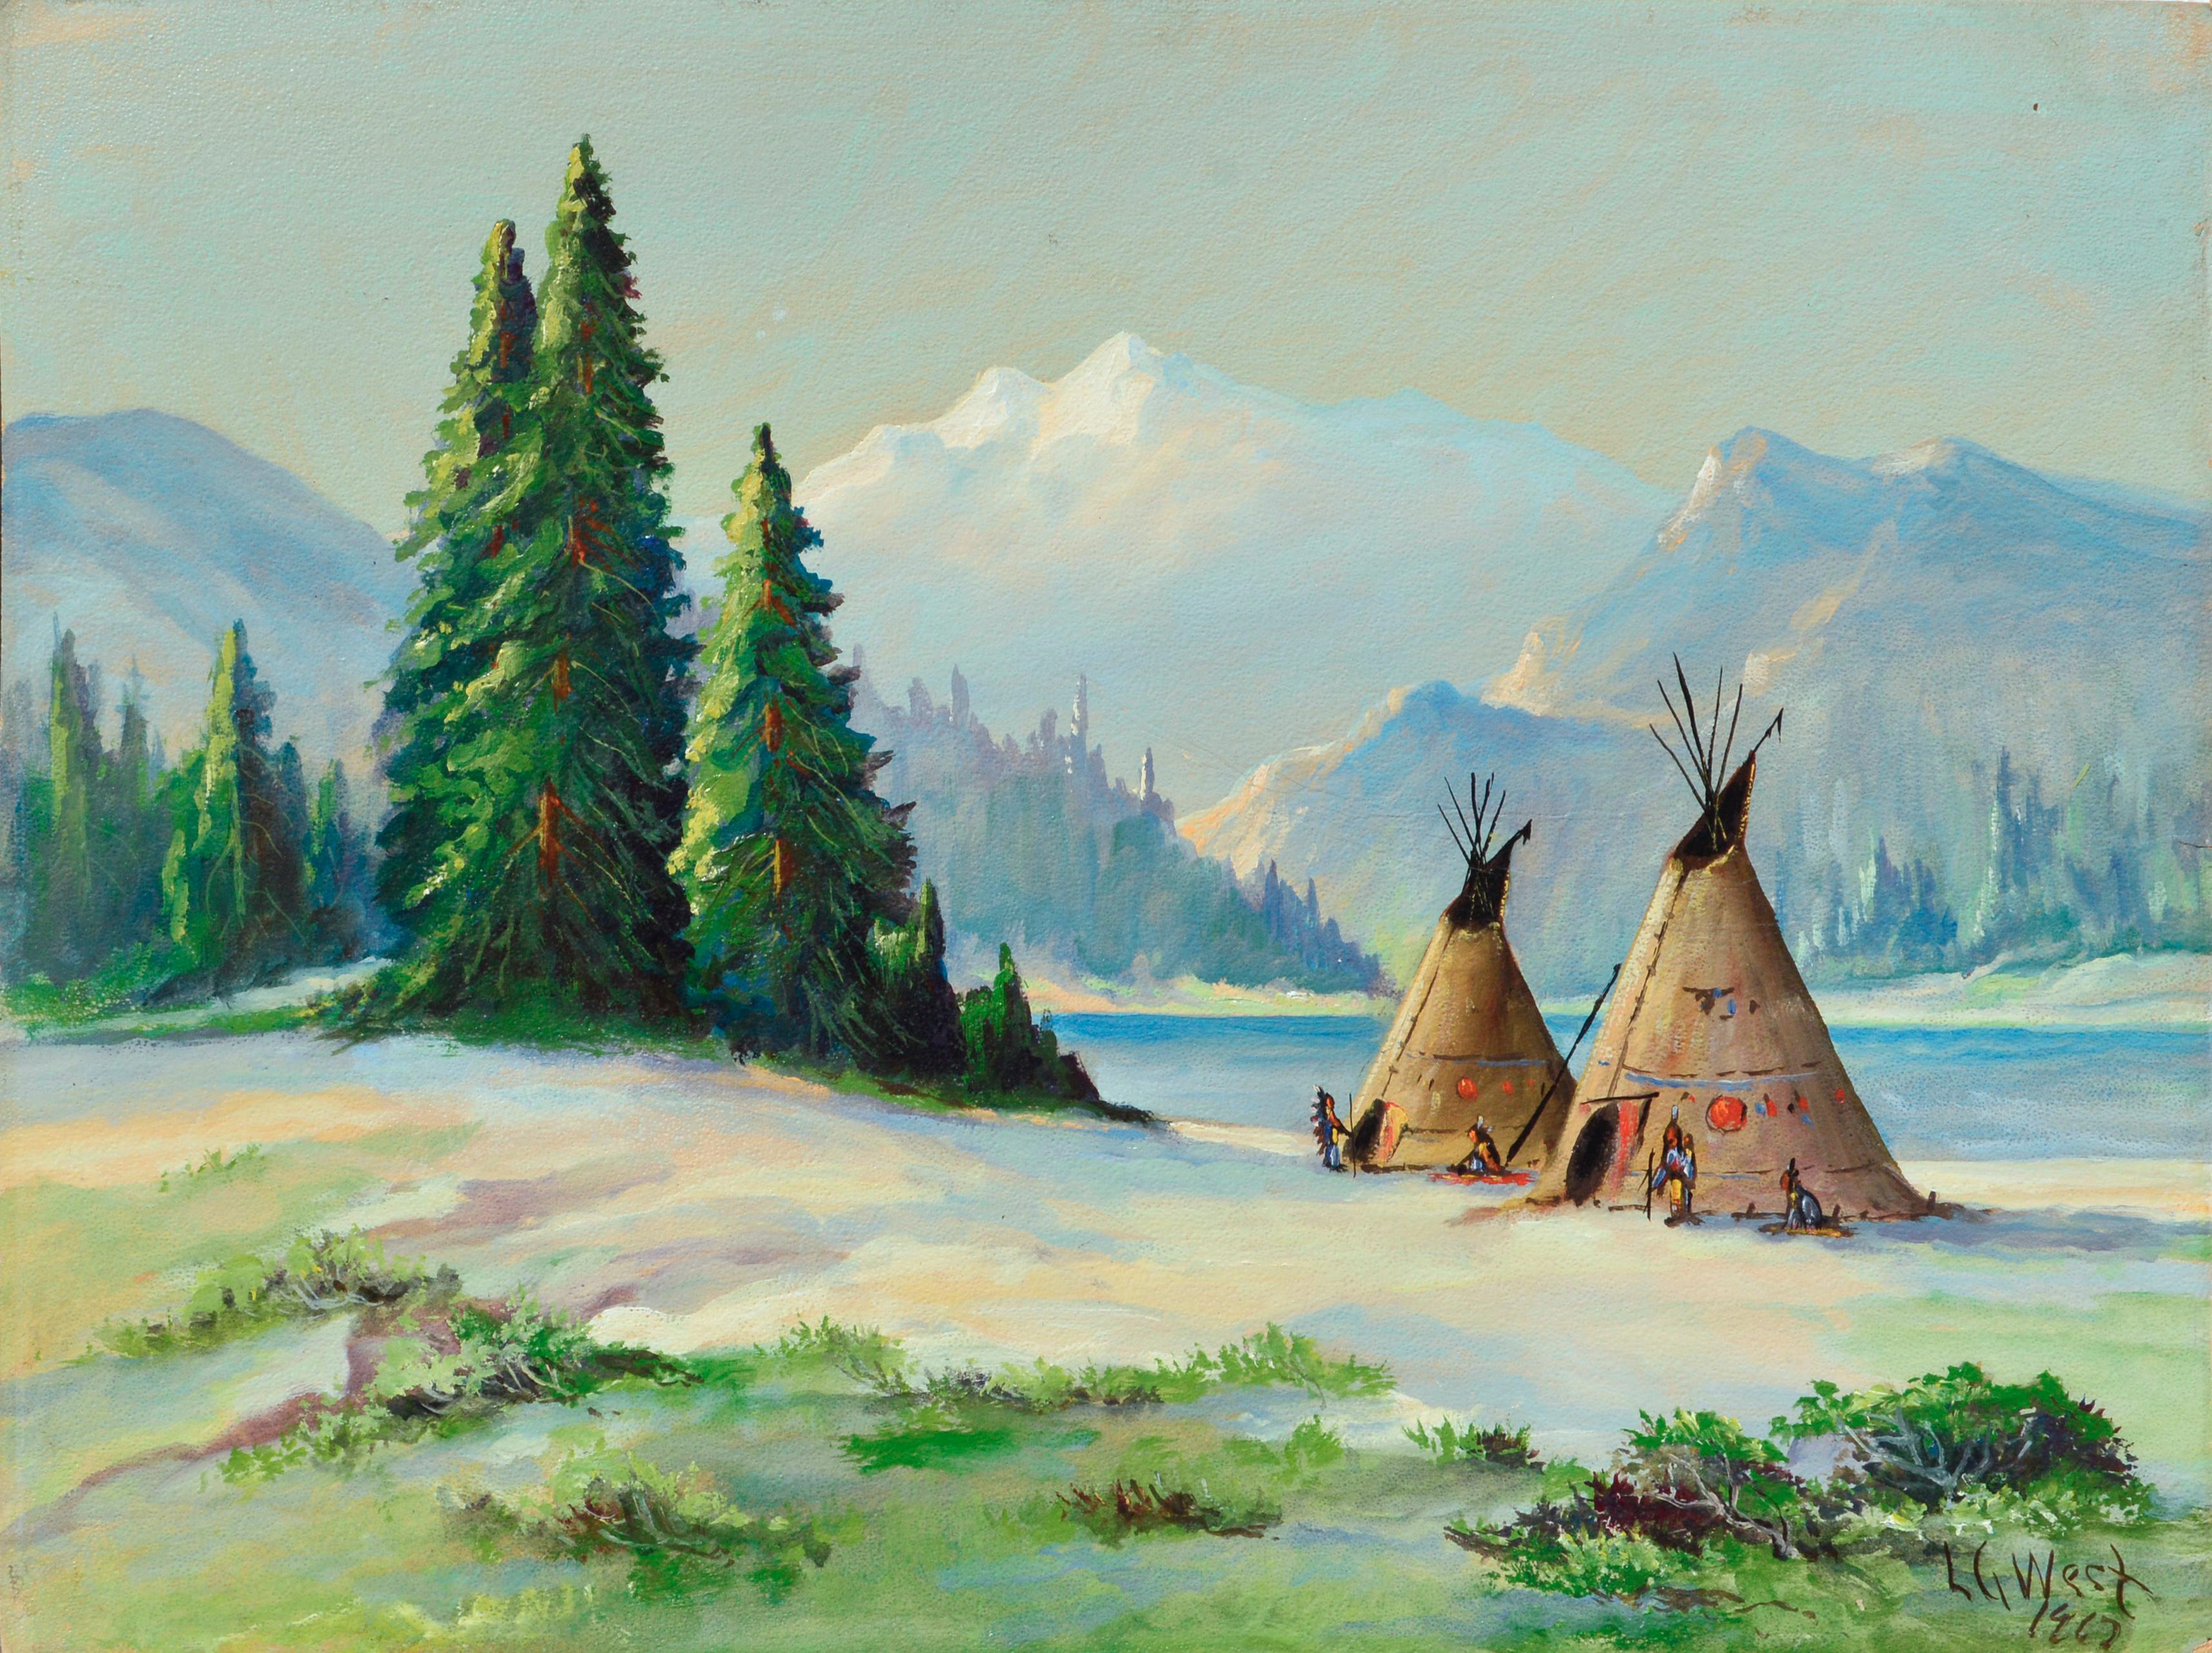 Native American Camp by the Lake - Landscape - Painting by L. G. West